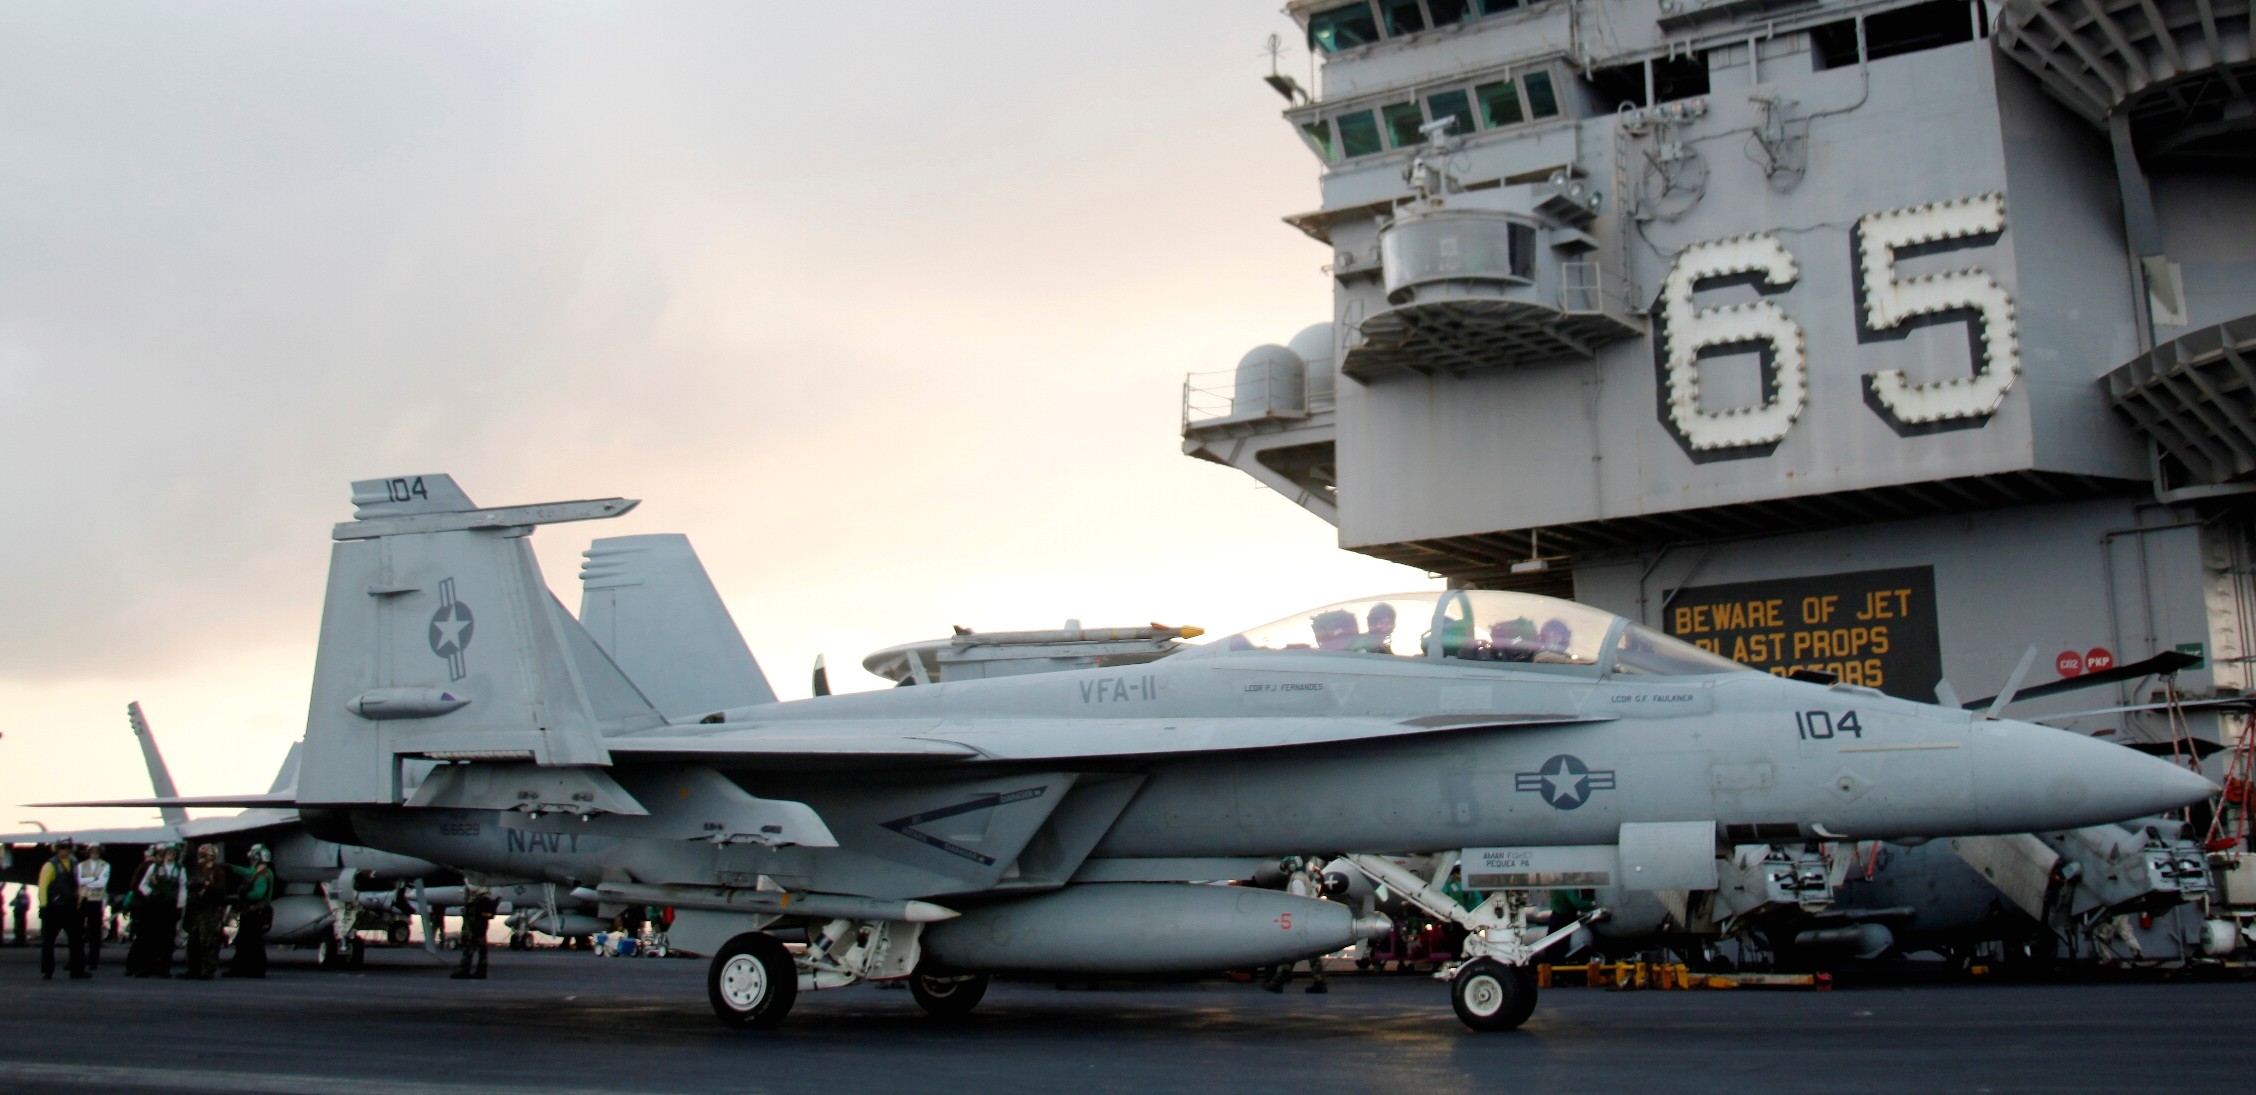 vfa-11 red rippers strike fighter squadron us navy f/a-18f super hornet uss enterprise cvn-65 carrier air wing cvw-1 80